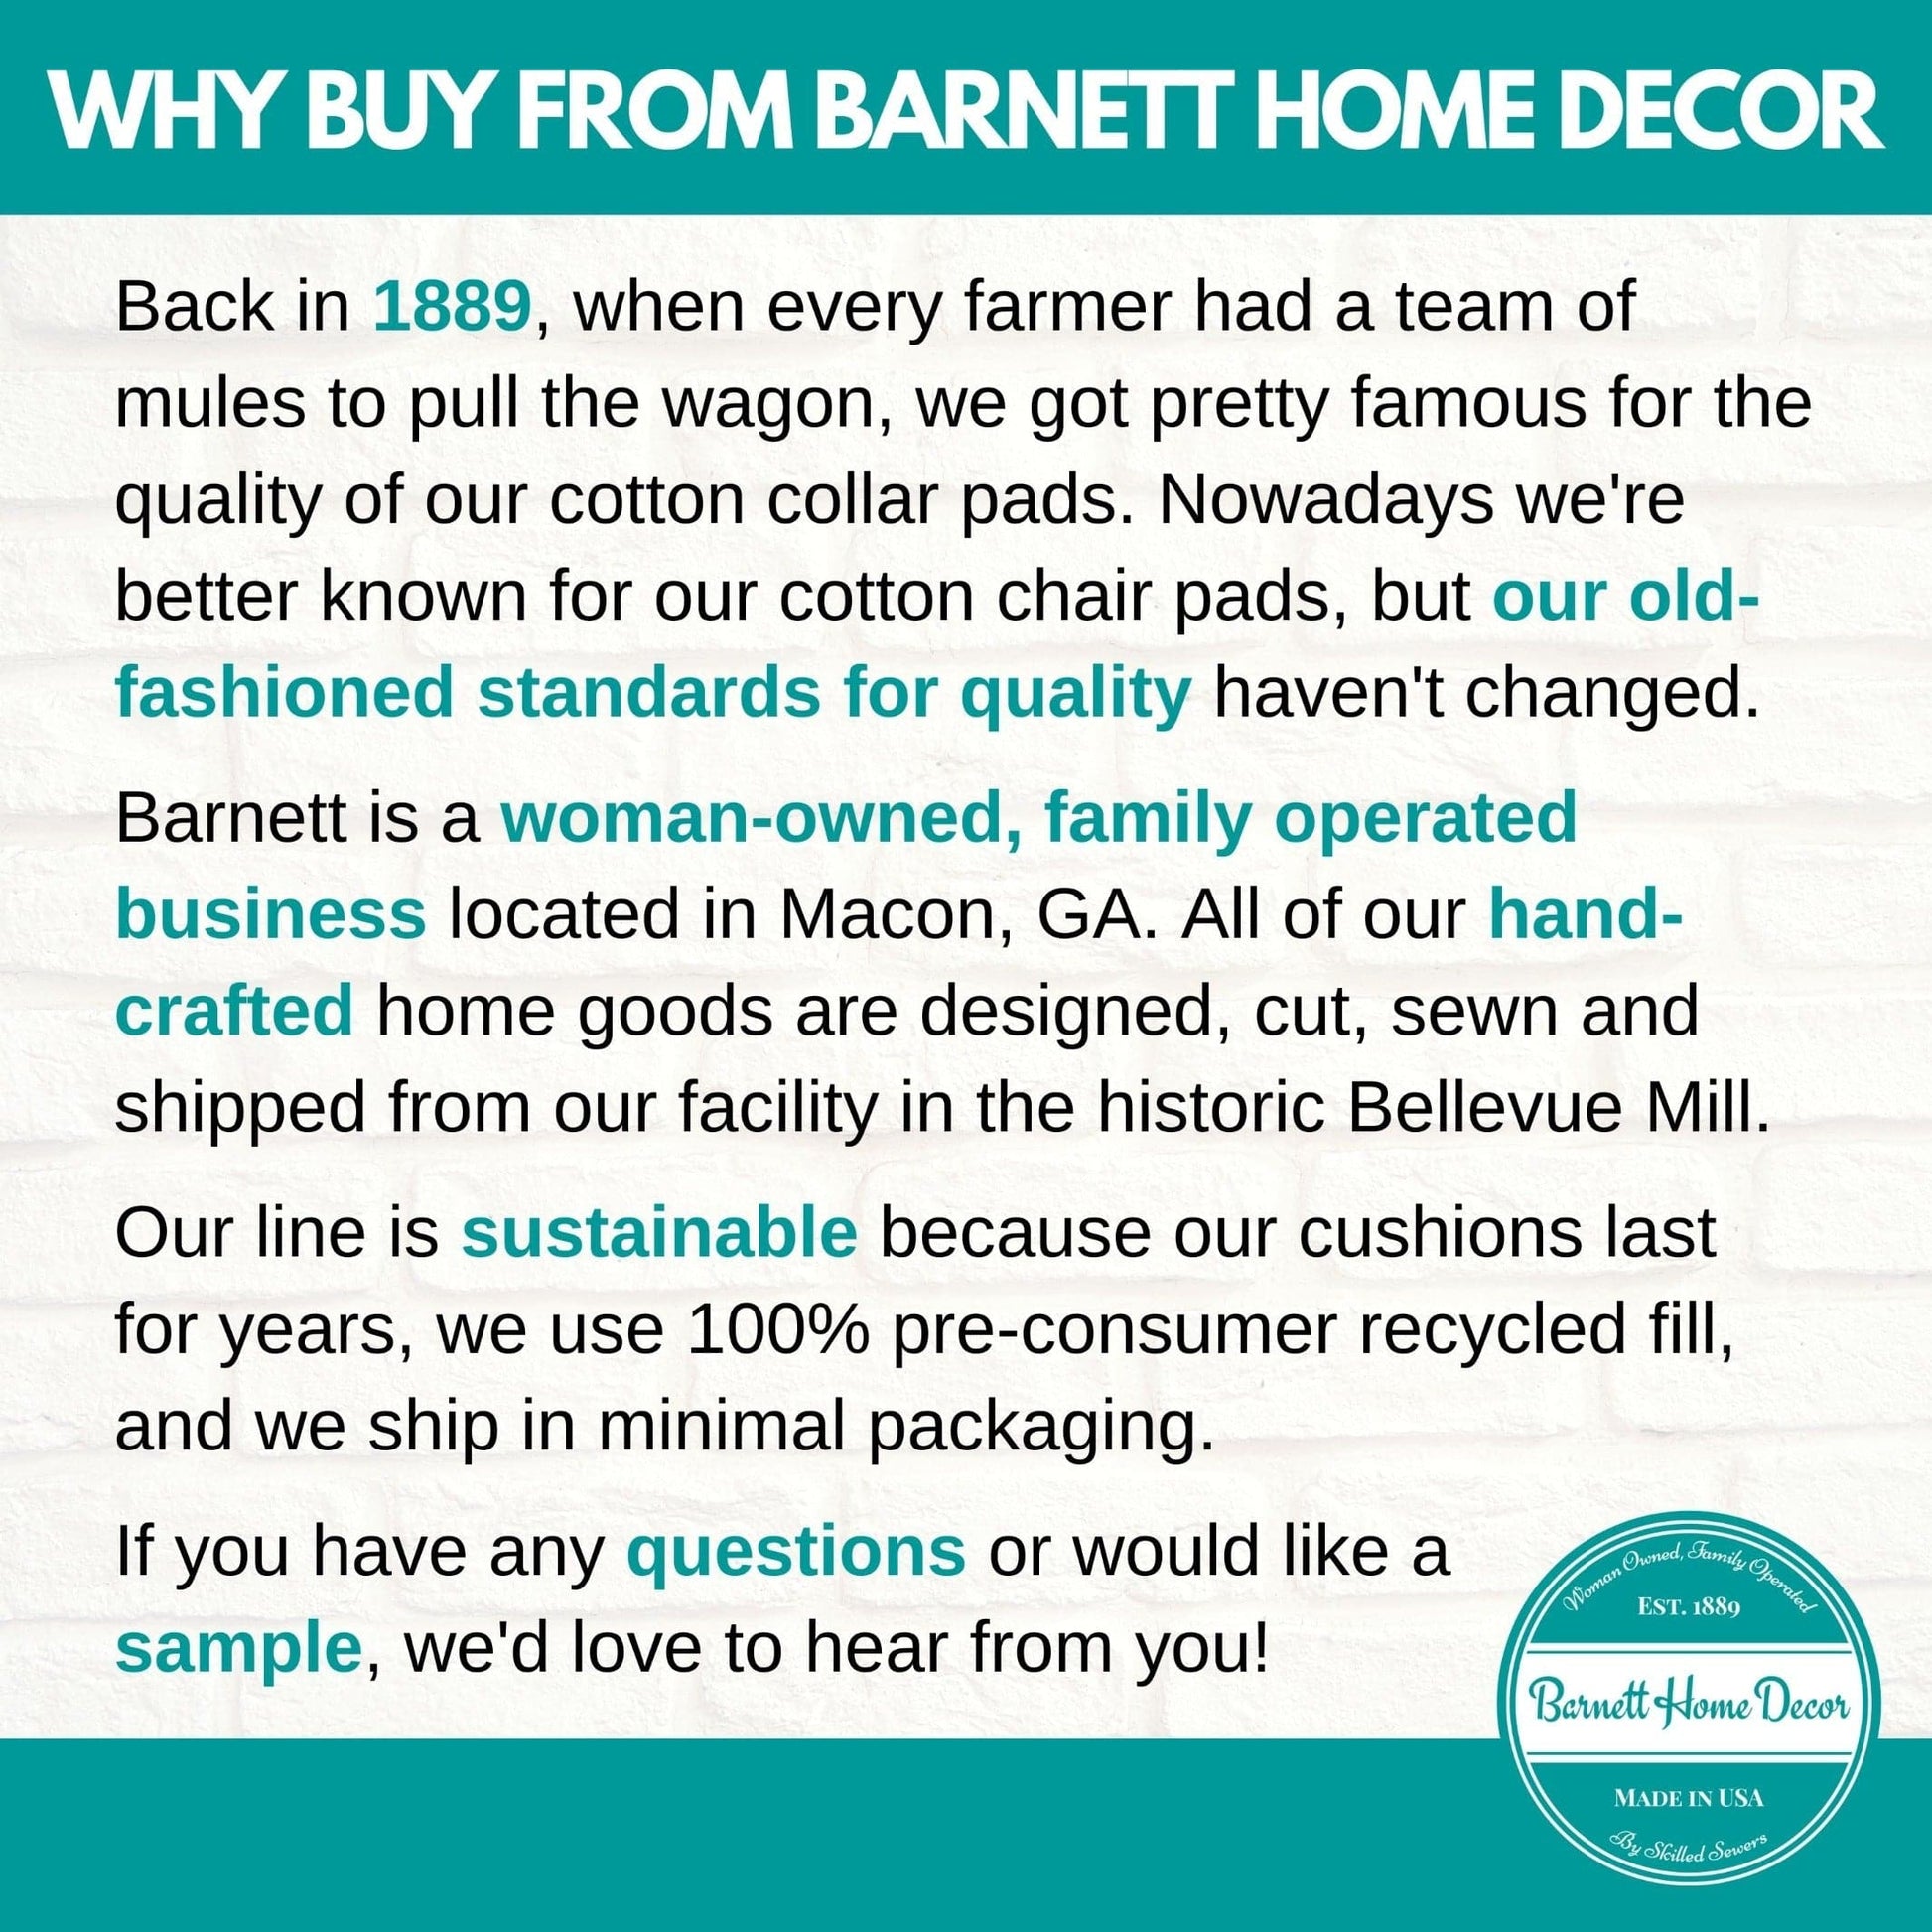 Why Buy From Barnett Home Decor - We're a woman-owned, family run business located in Macon, GA. 